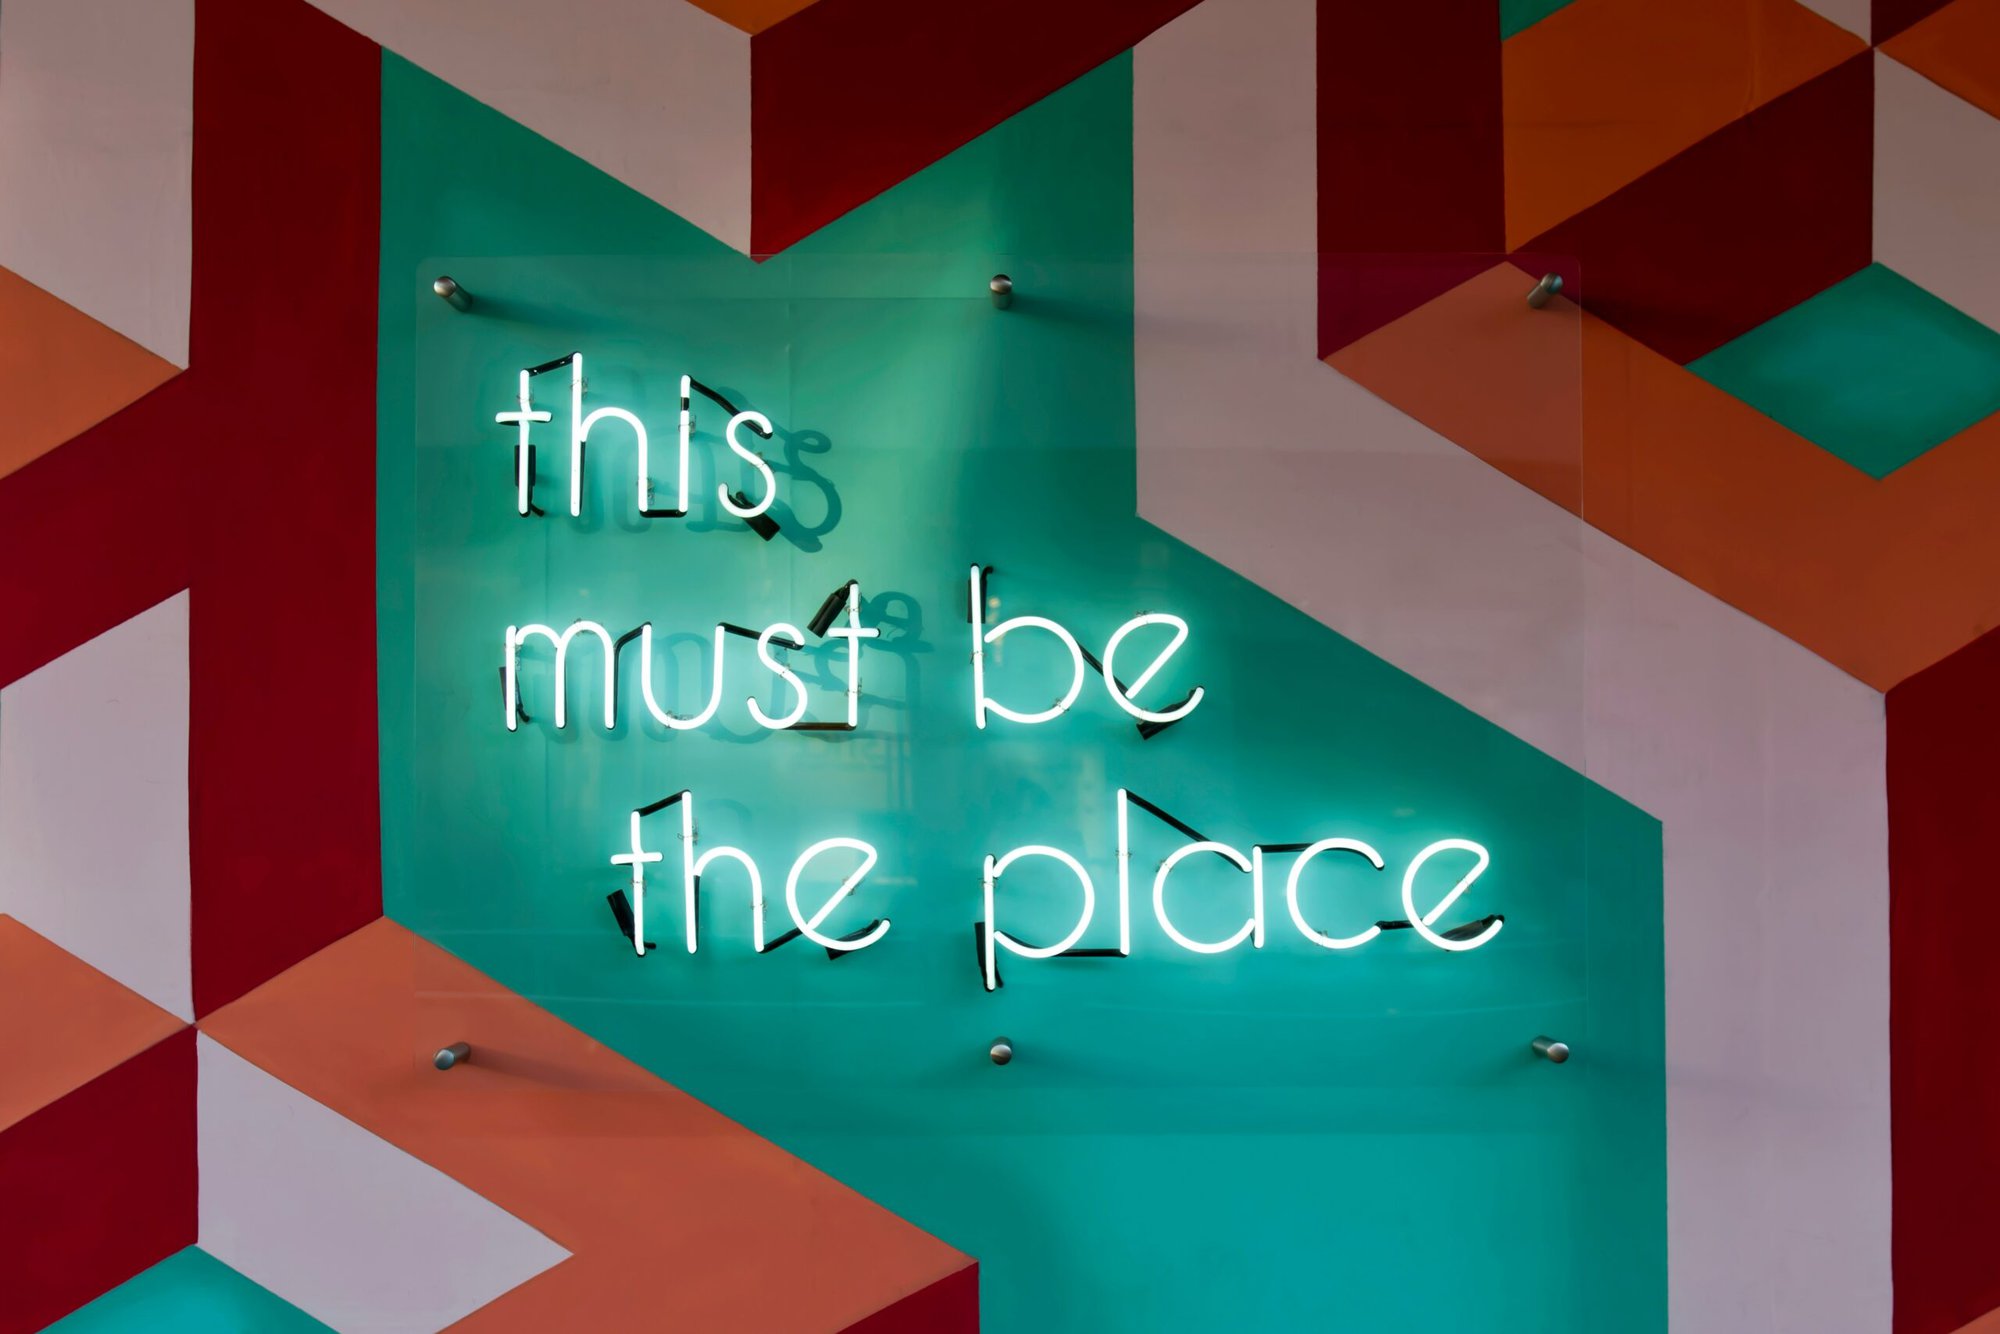 A neon sign reading "this must be the place"